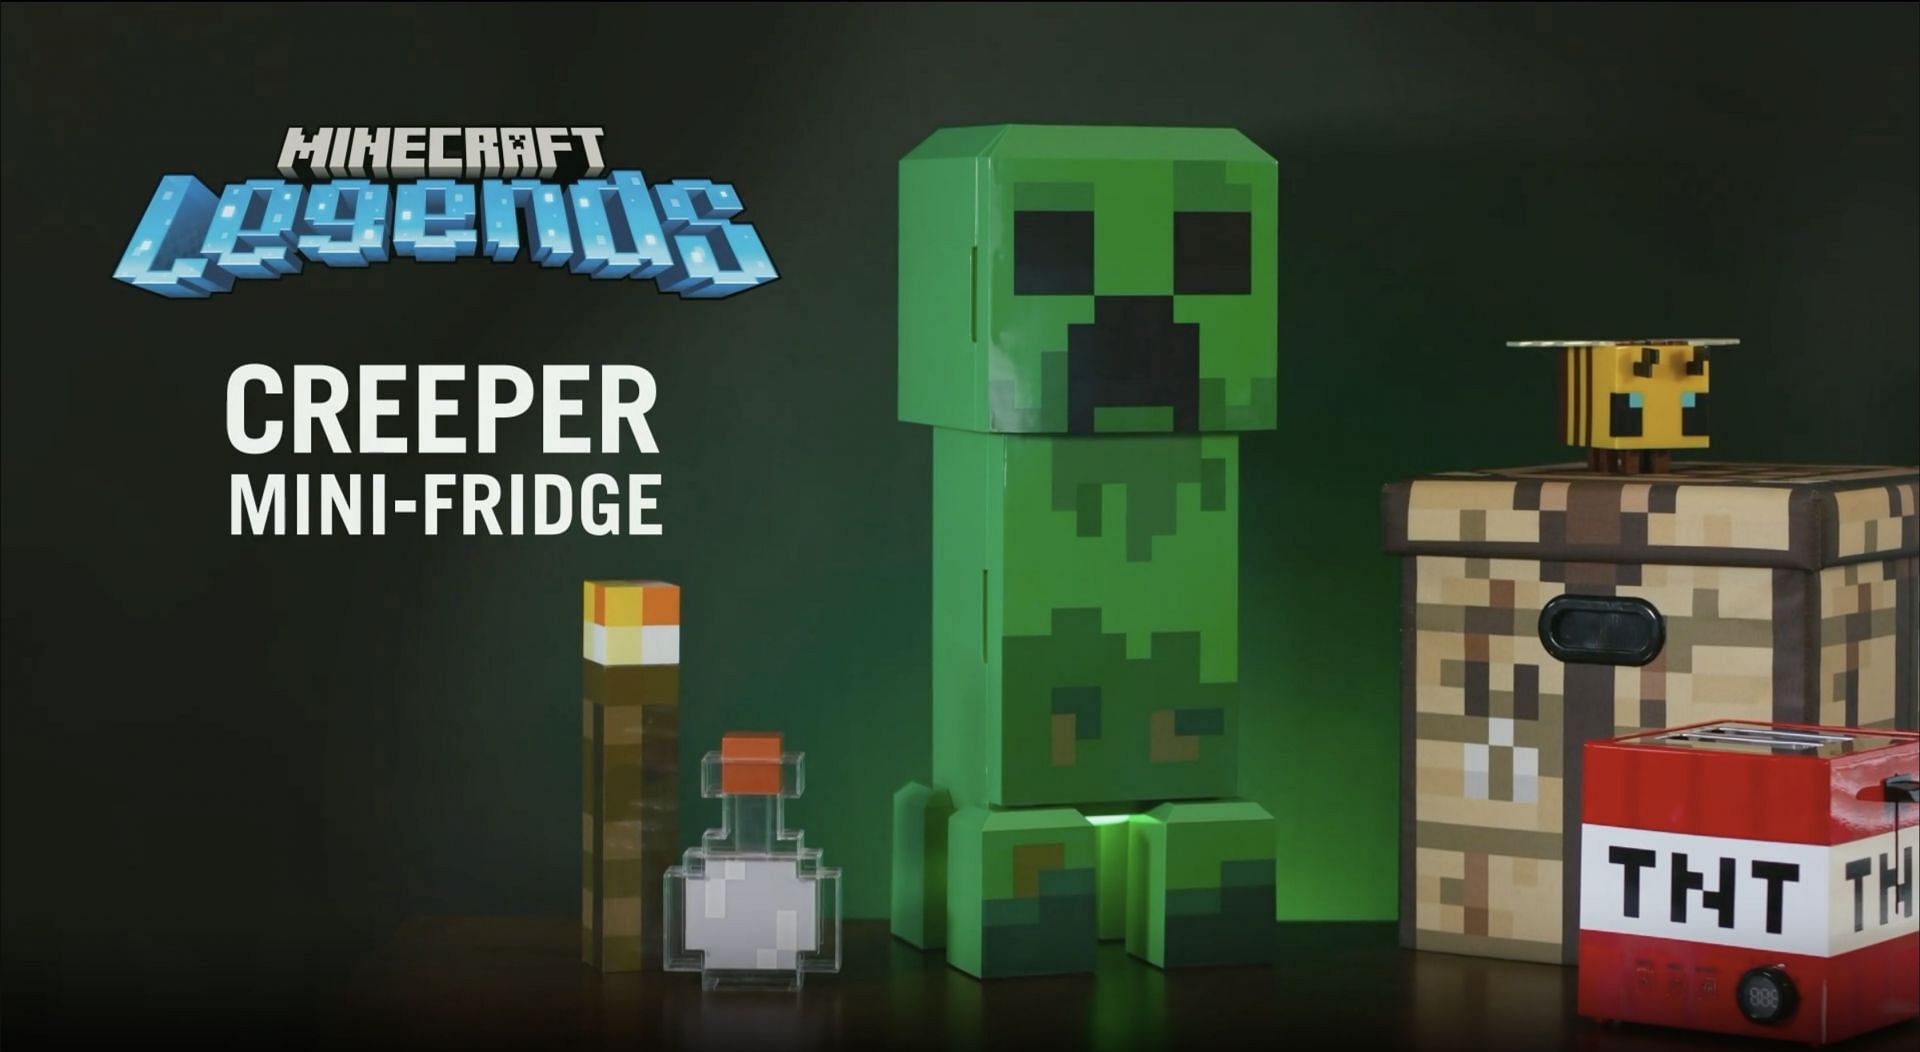 Minecraft releases creeper-themed mini fridge, now available at Walmart